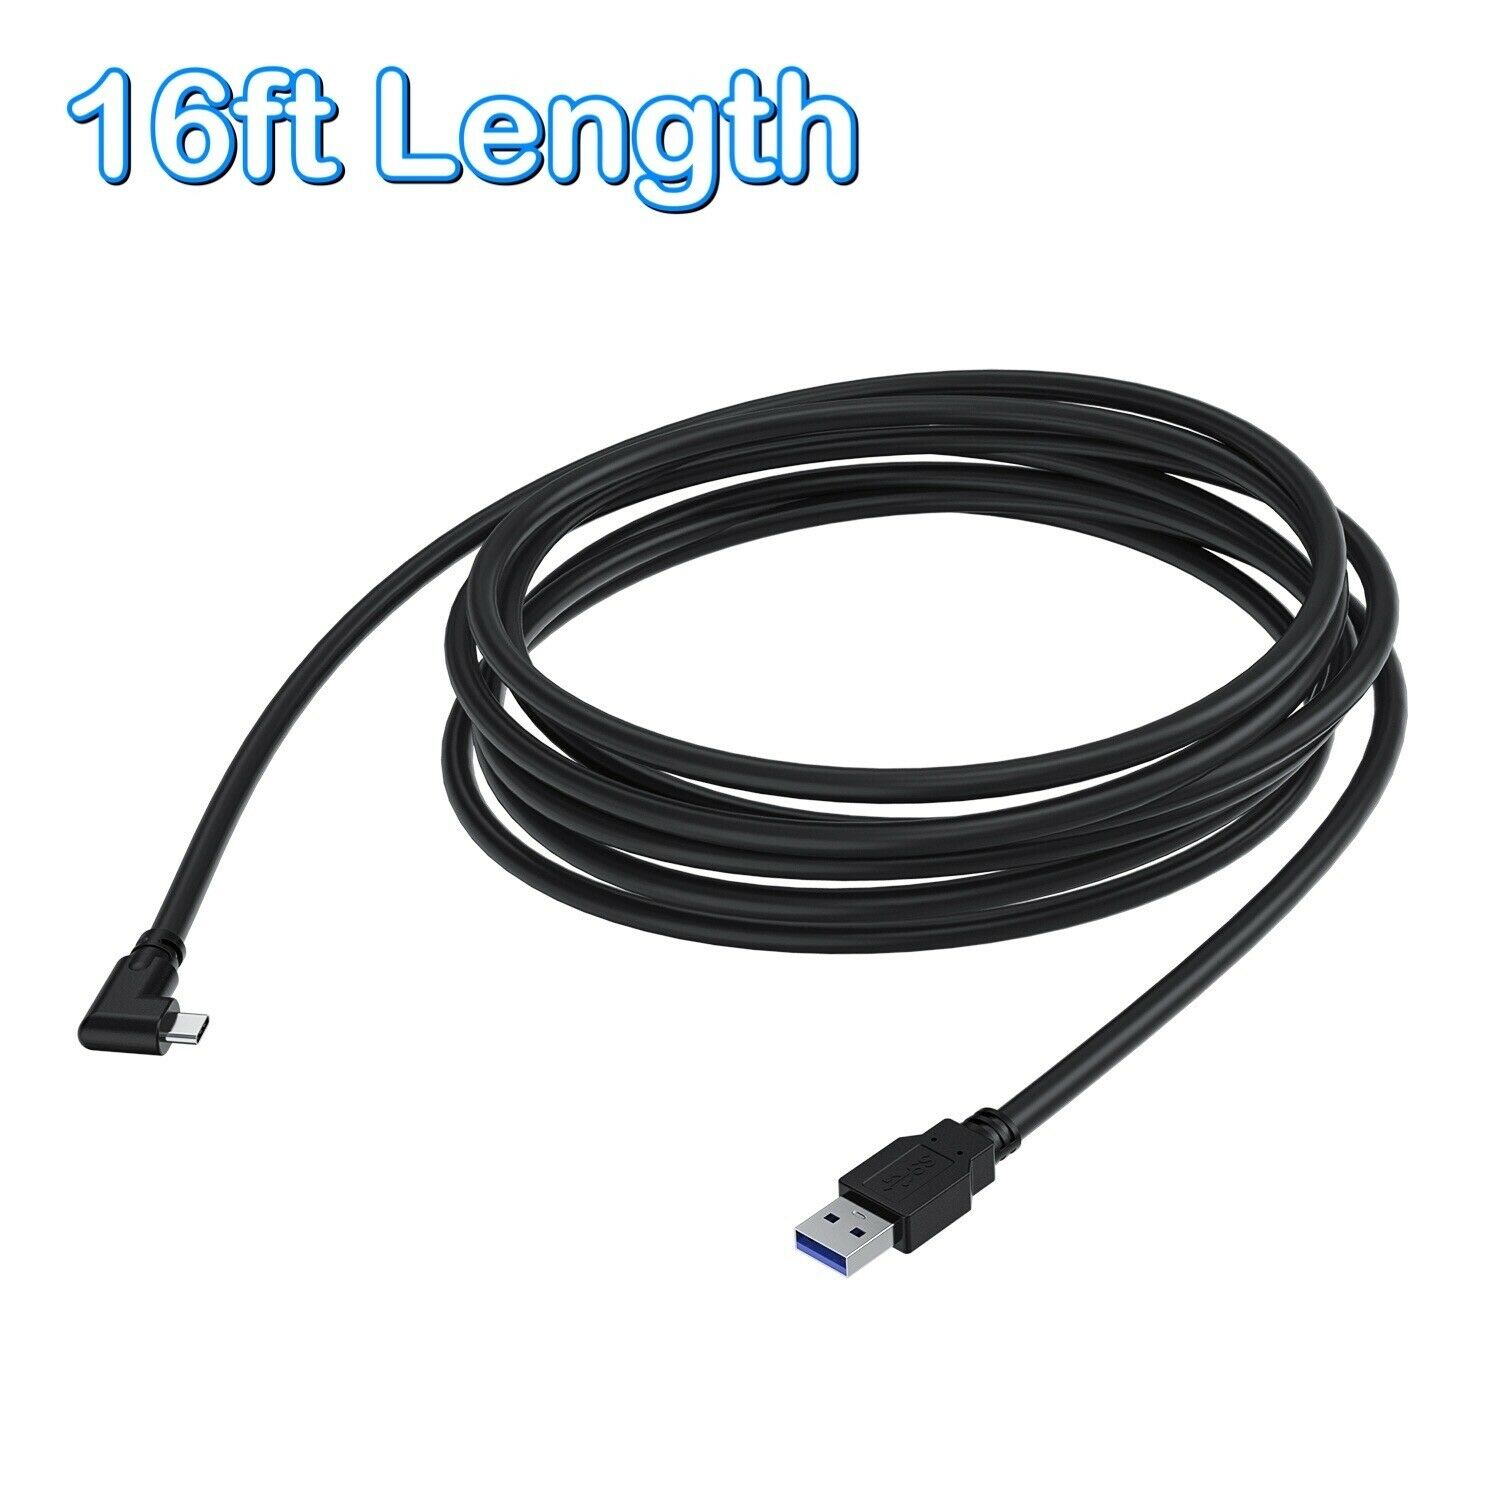 16ft Link Cable for Oculus Quest - Right Angle USB 3.2 Gen 1 USB-C to USB-A